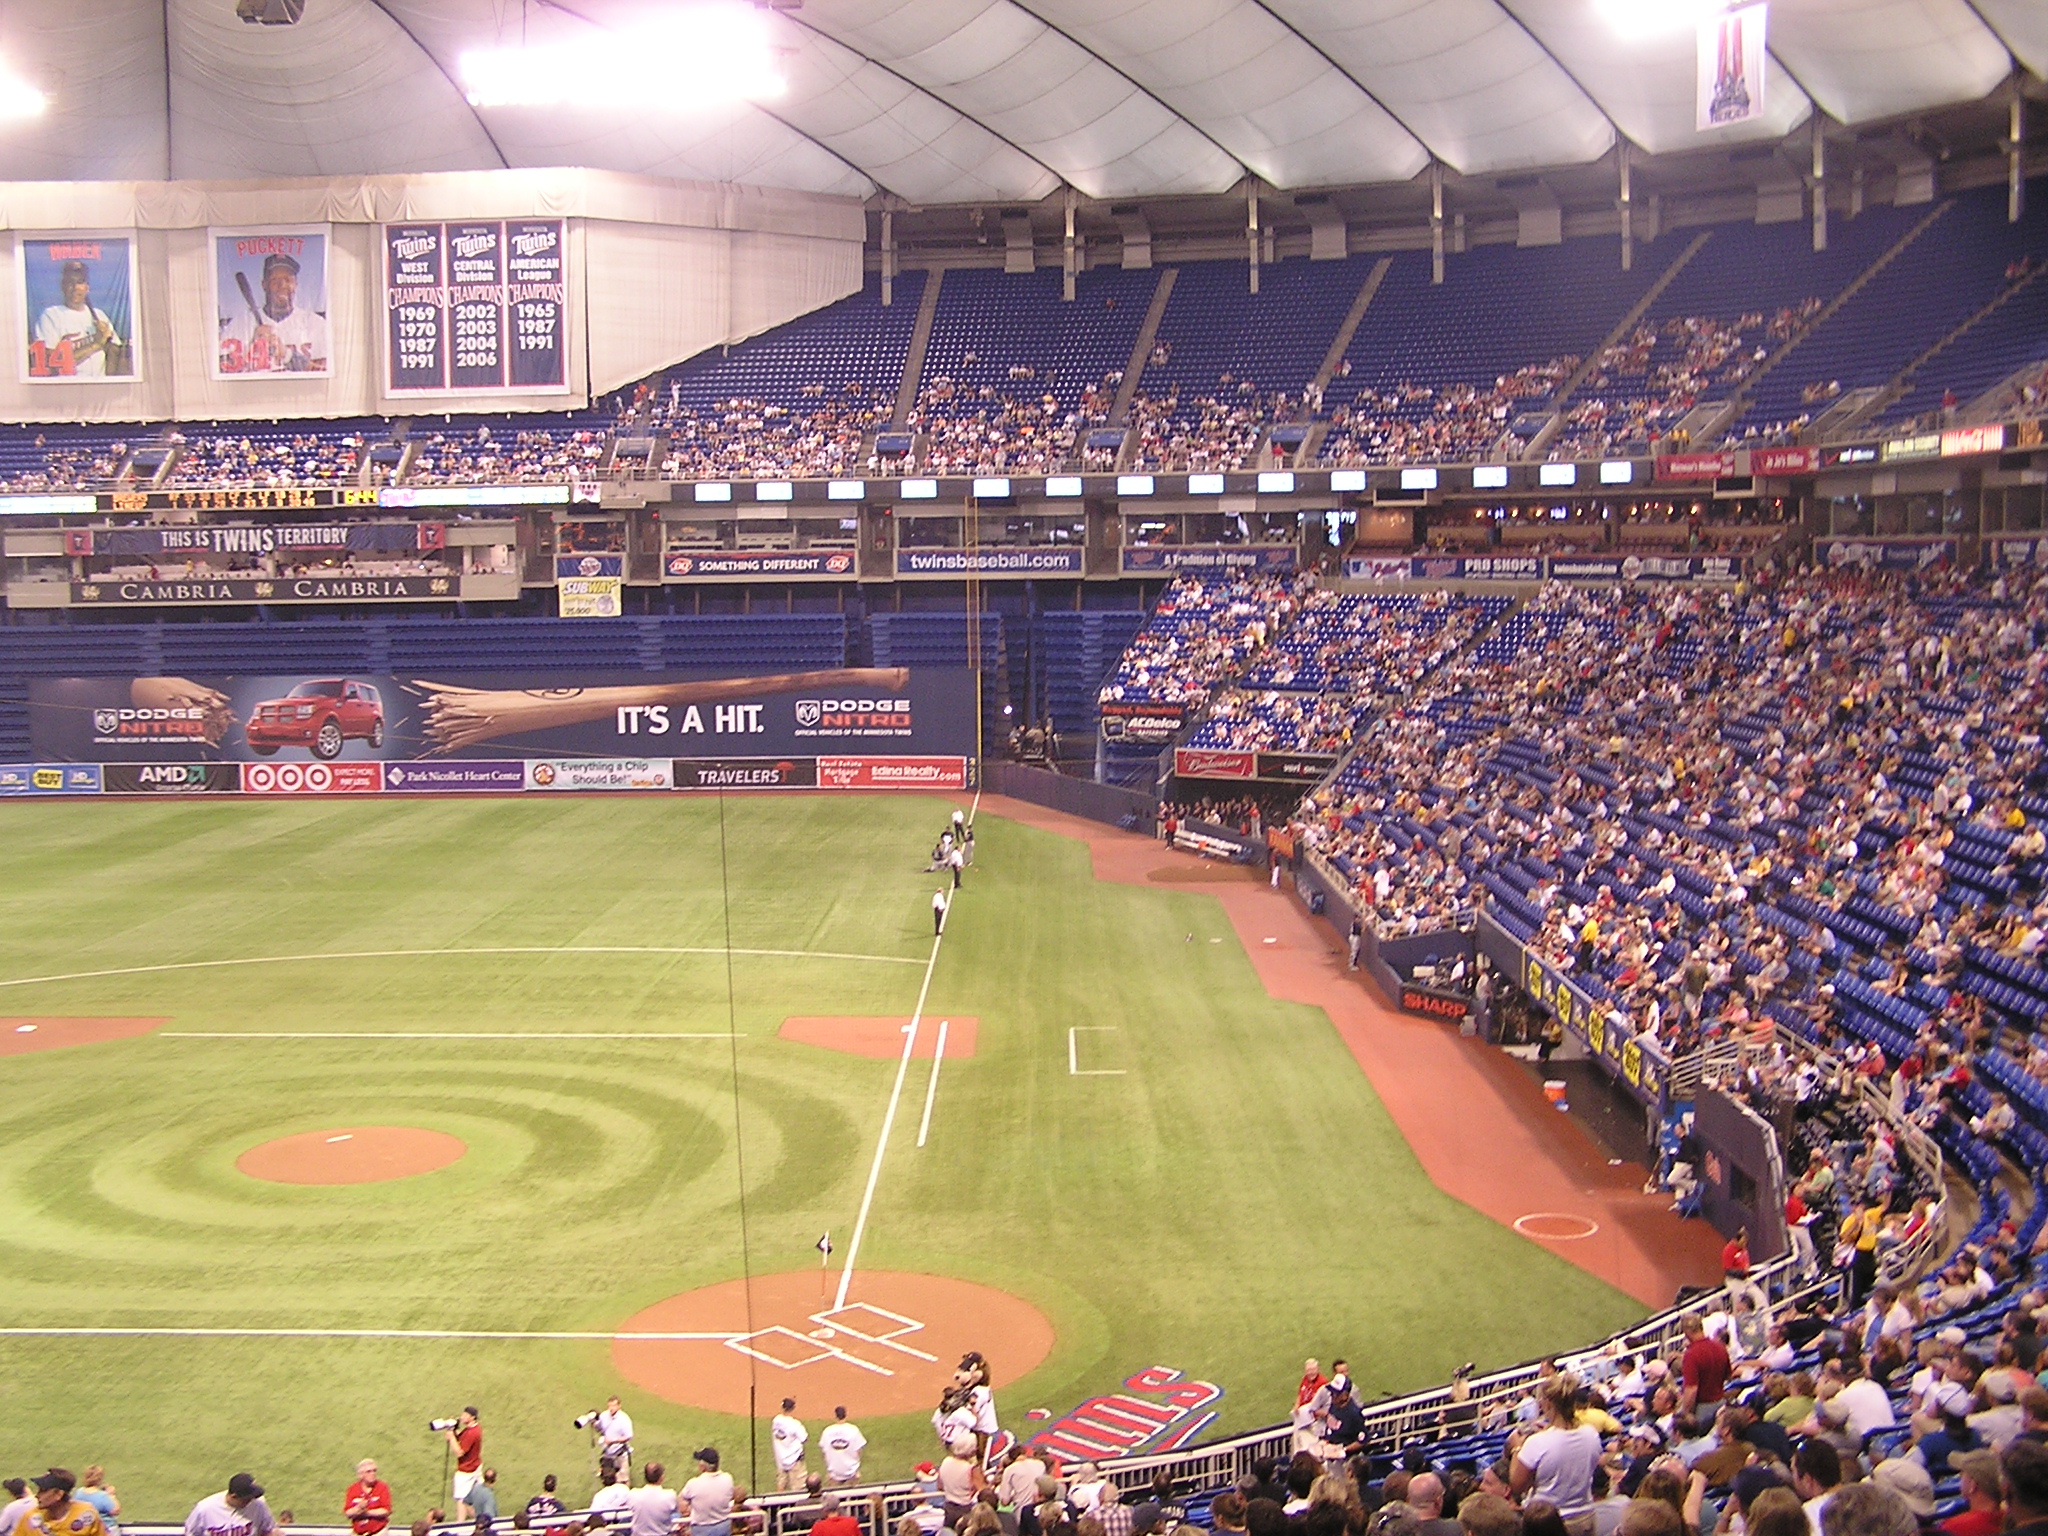 The view from behind Home Plate - The Metrodome